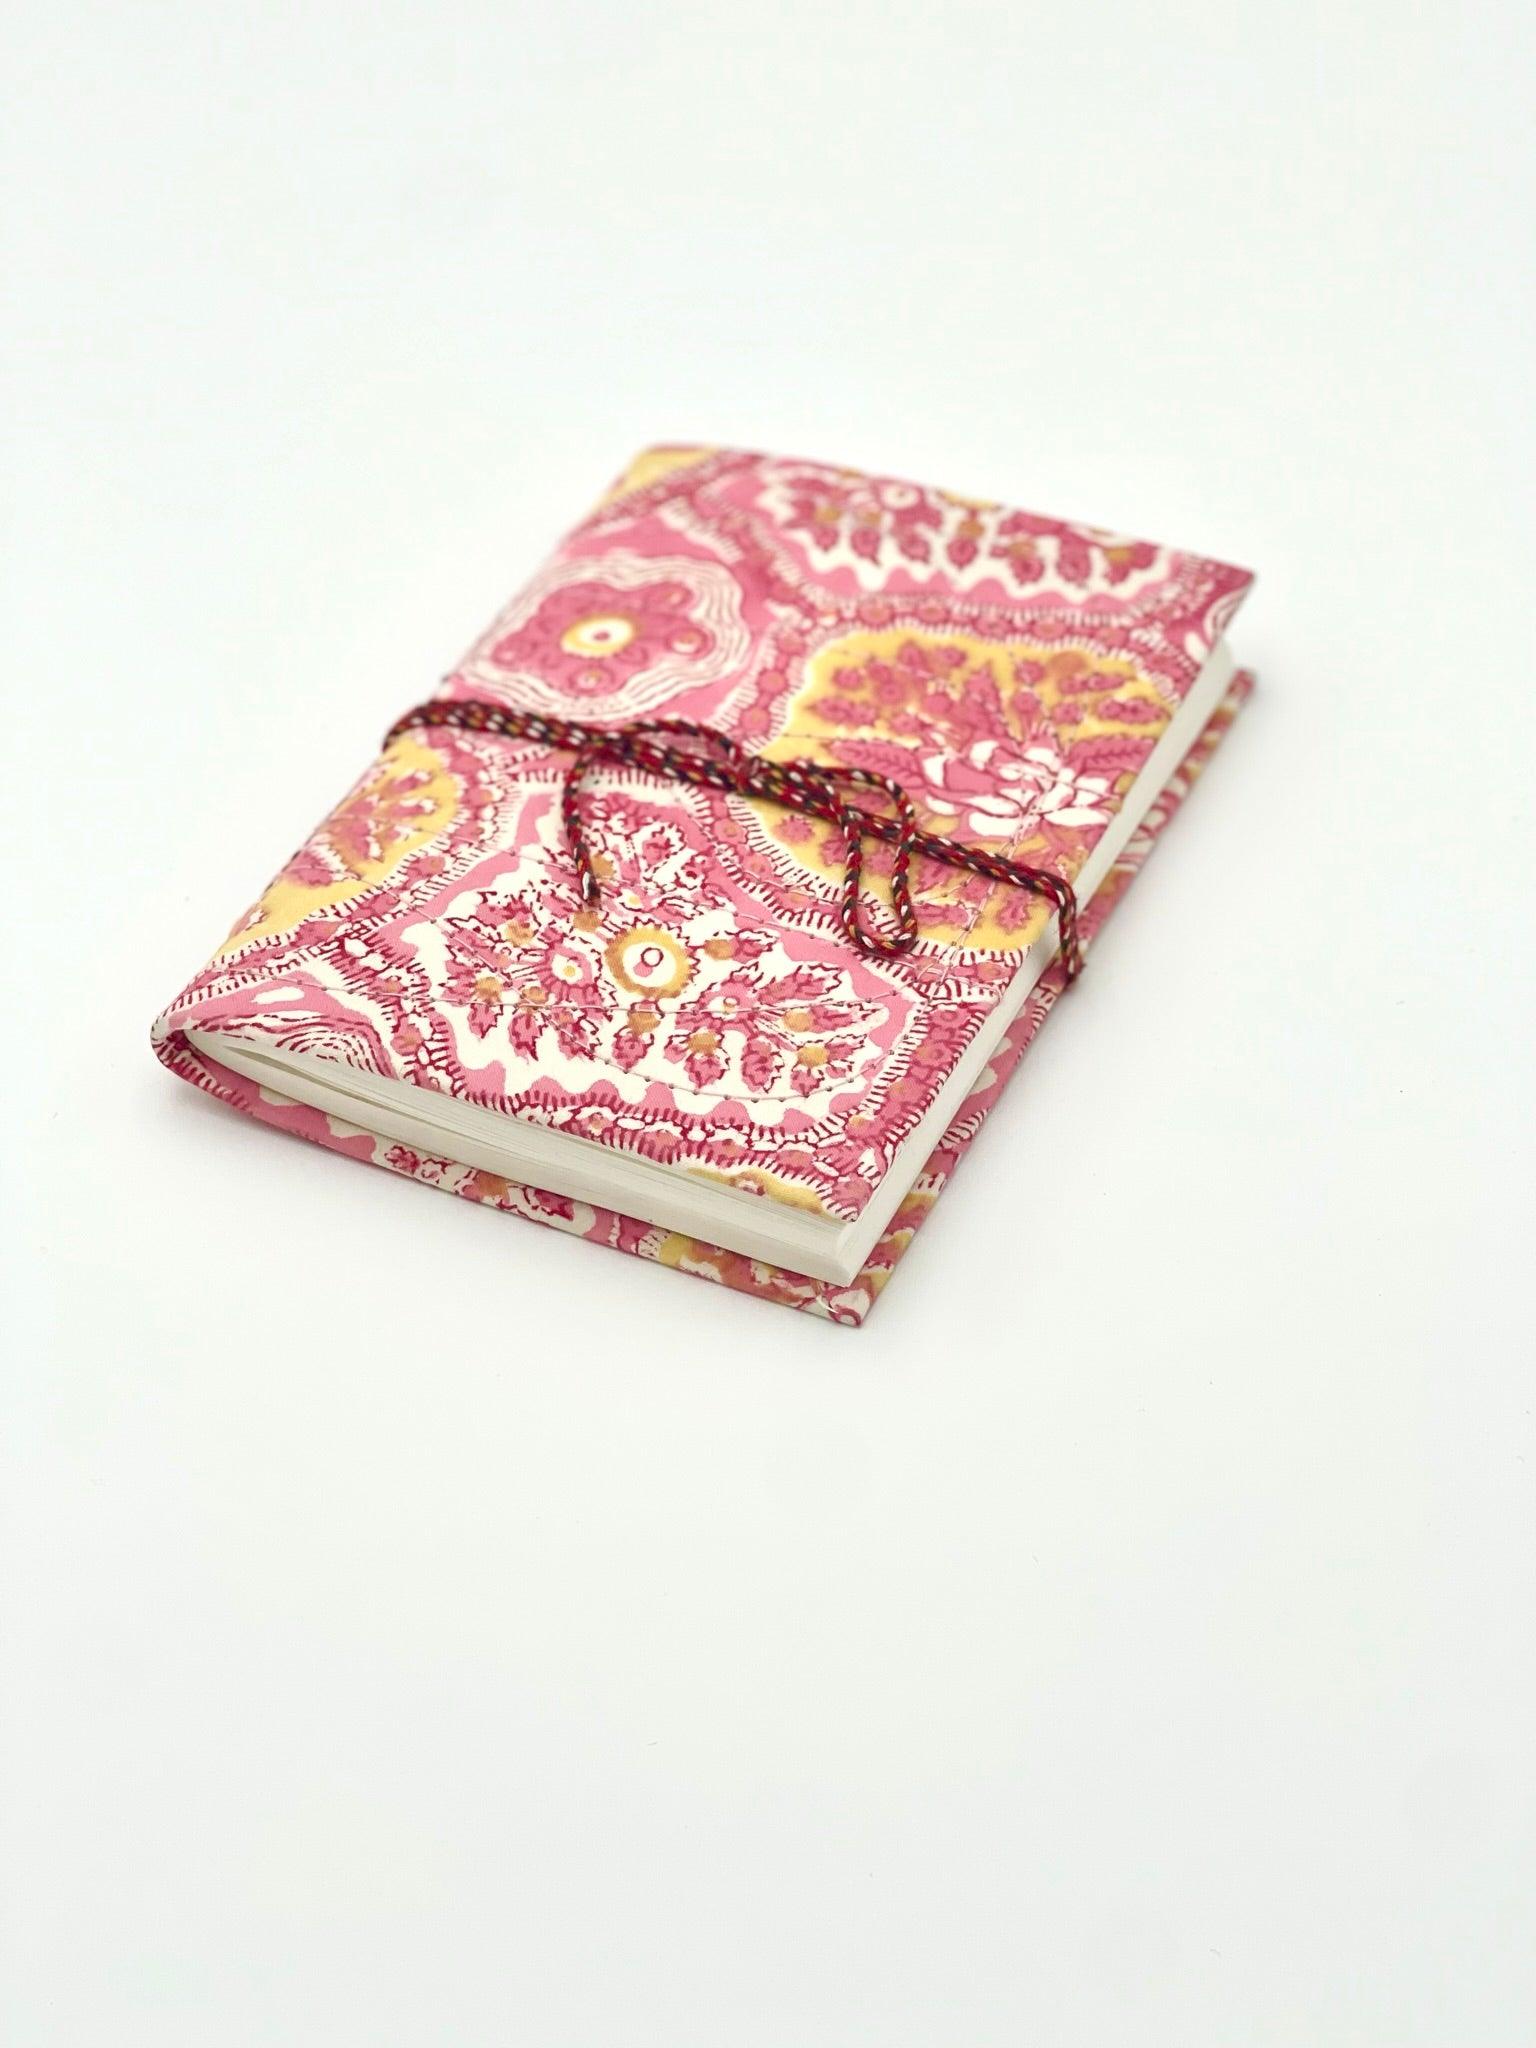 Block Print Journal/Notebook, Pink & Yellow Floral - Unlined, 100 Pages, Thick Paper, Hard Cover - Transcend